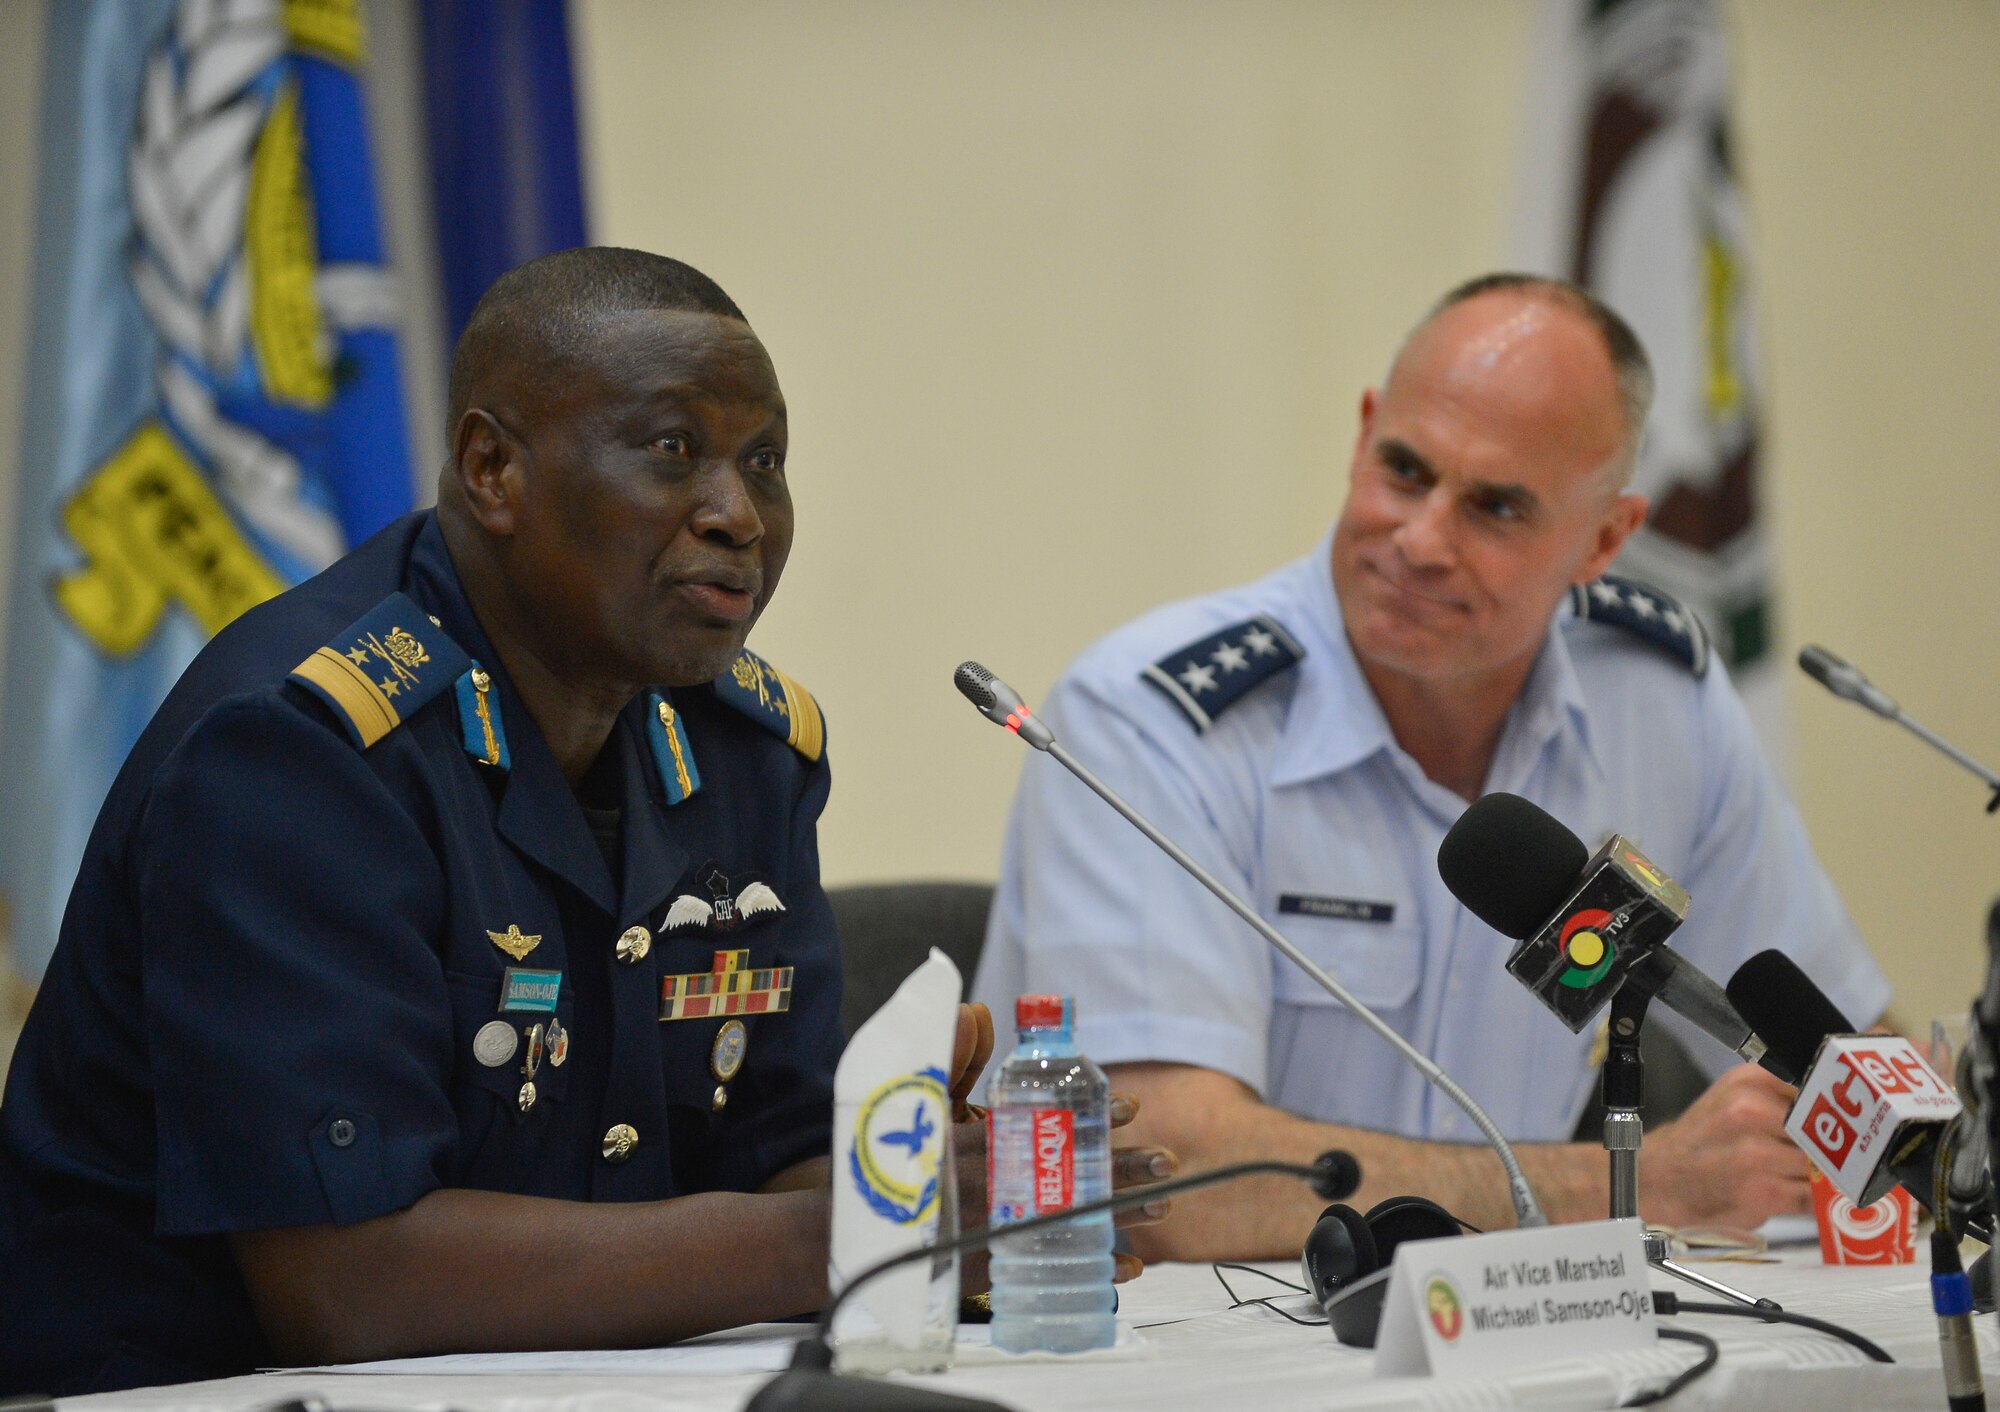 Cohosts Air Vice Marshal Michael Samson-Oje, Ghanaian chief of air staff (Left), and Lt. Gen. Craig A. Franklin, 3rd Air Force commander (Right), take questions during a press conference after the closing ceremony of the Regional African Air Chiefs Symposium, Aug. 22, 2013, in Accra, Ghana. The RAACS brings air chiefs together to discuss how their unique capabilities can be collaborated to resolve regional challenges. (U.S. Air Force photo by Airman 1st Class Jordan Castelan/Released)